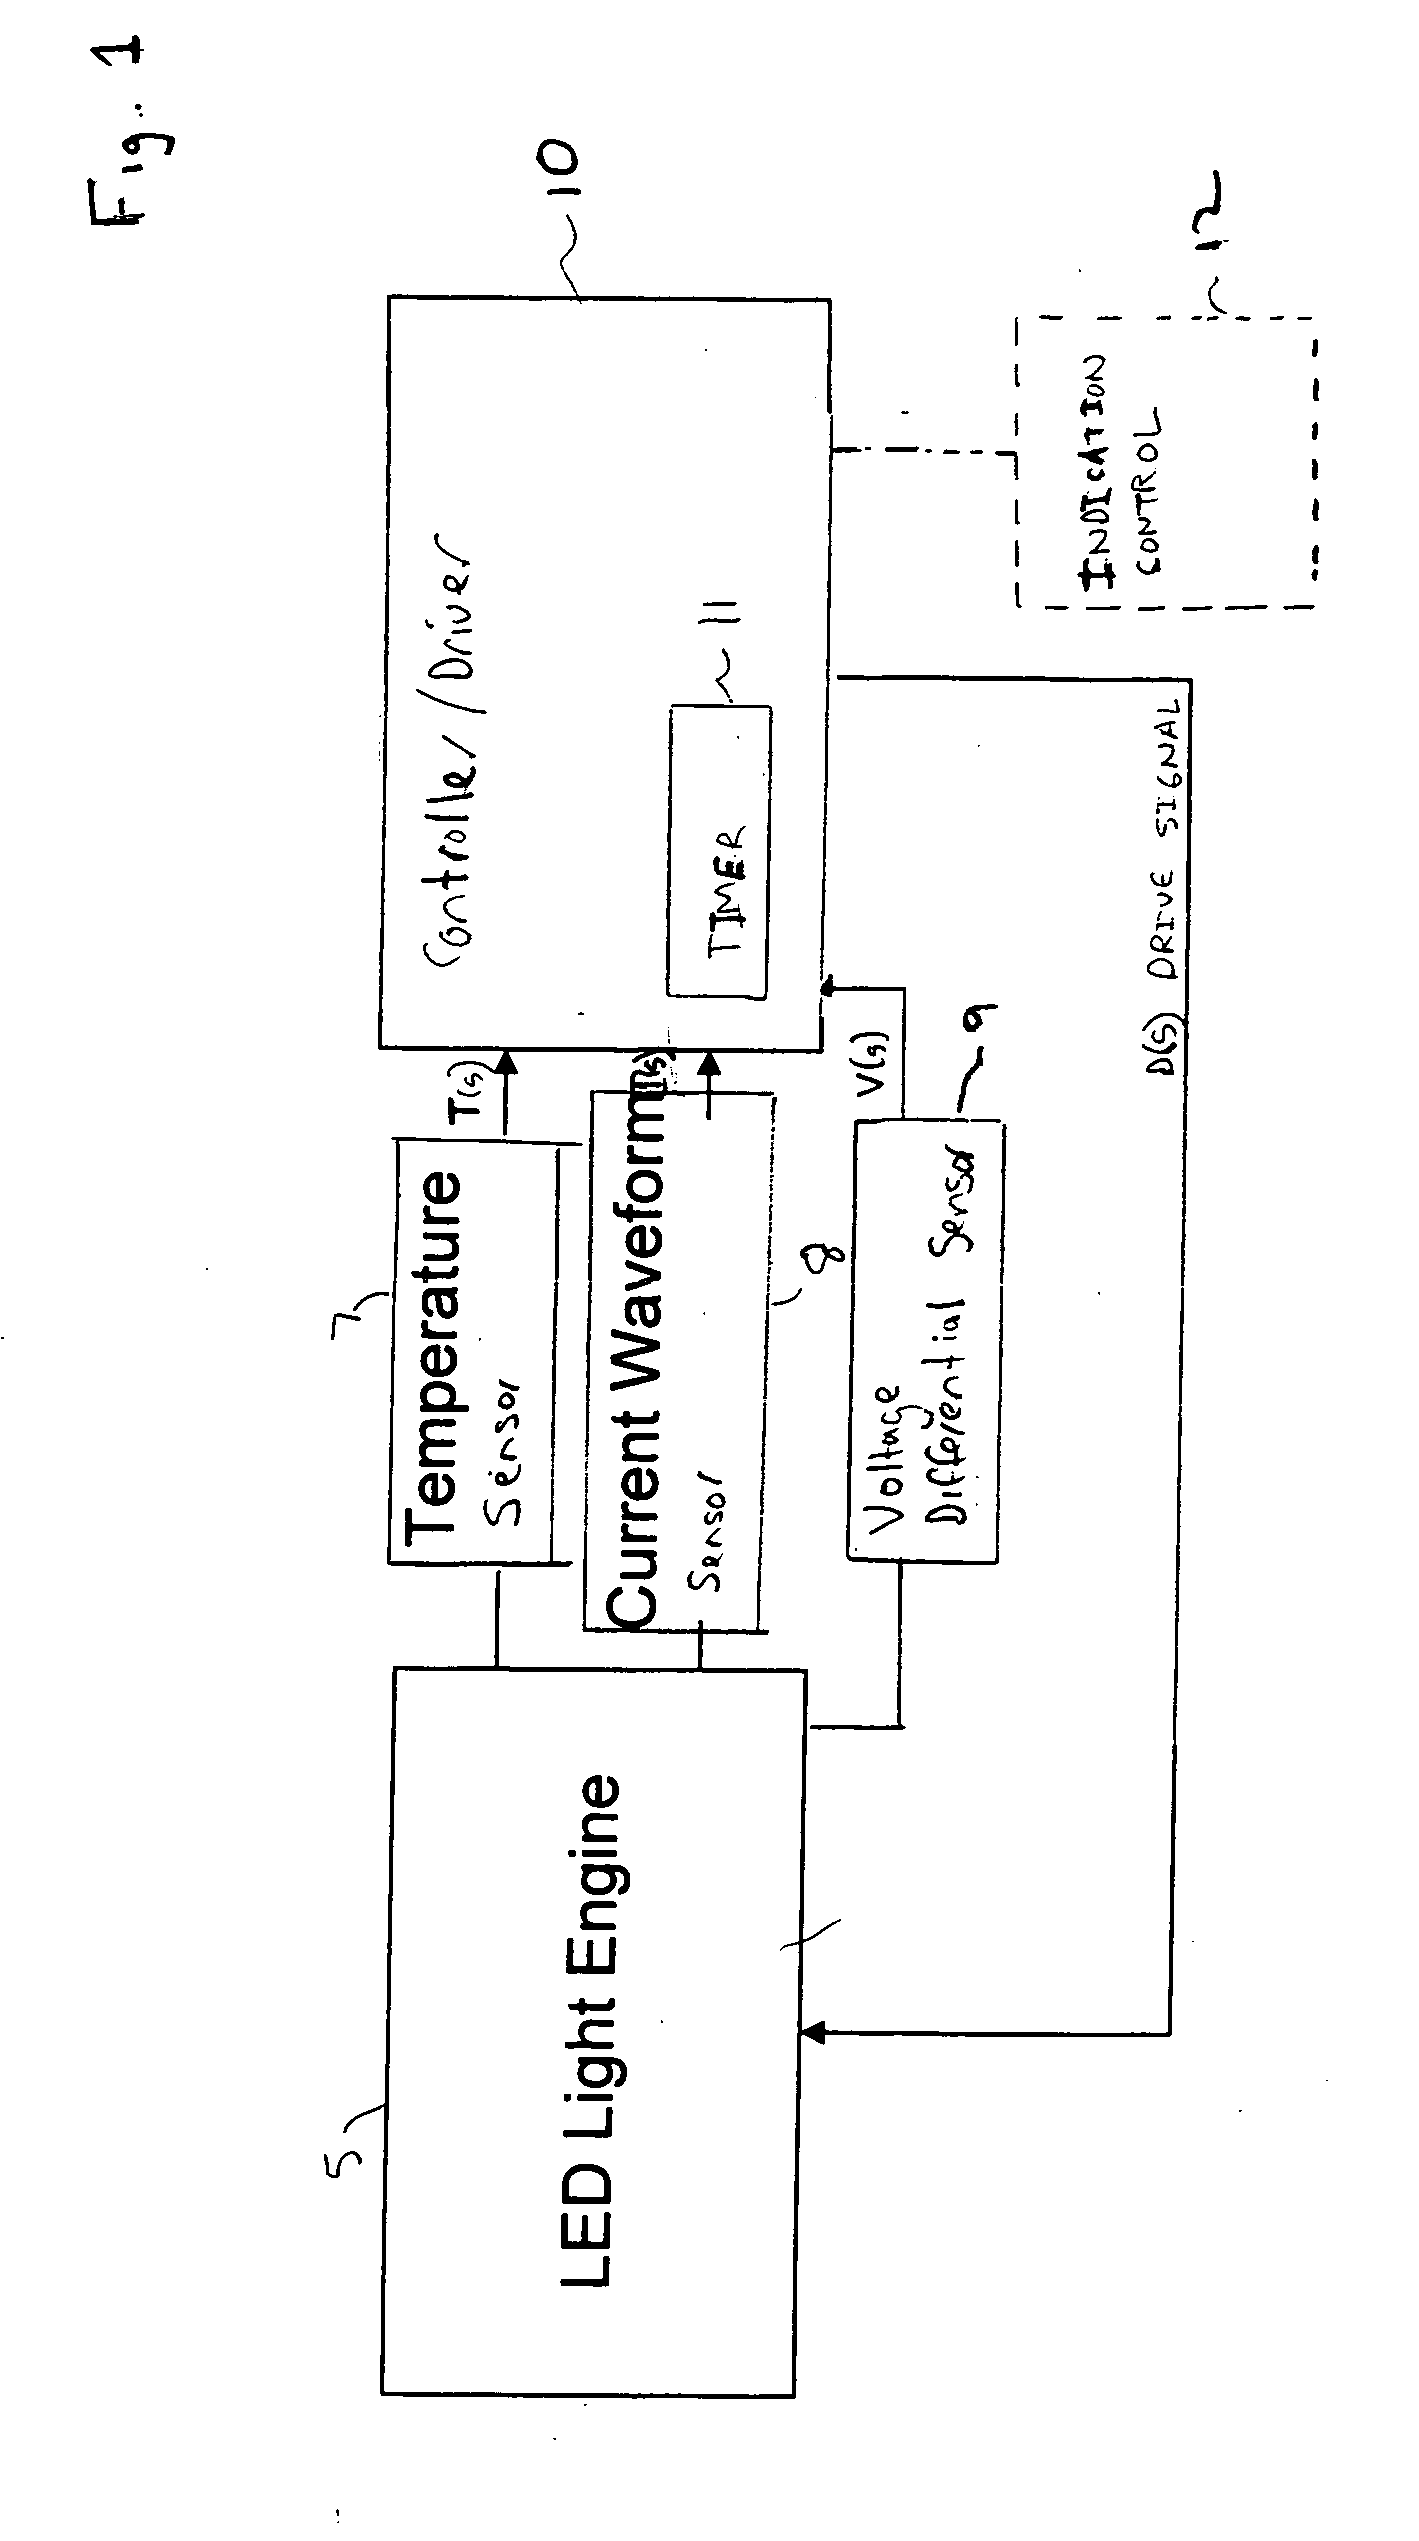 Intelligent drive circuit for a light emitting diode (LED) light engine